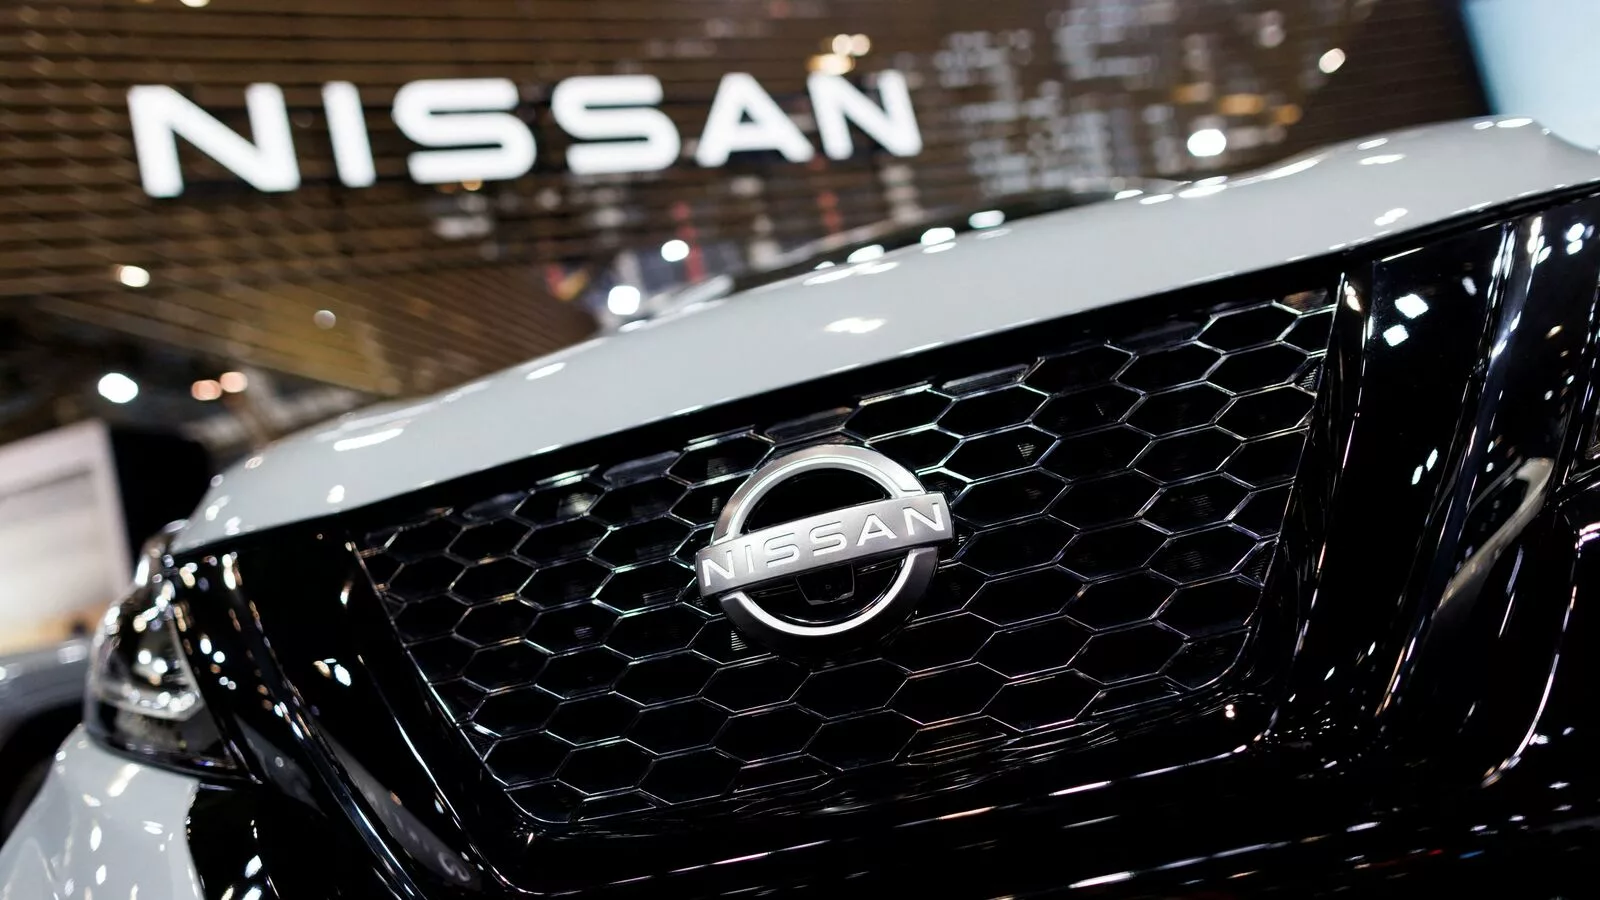 Japan has a shortage of drivers. So, Nissan plans driverless ride-share service